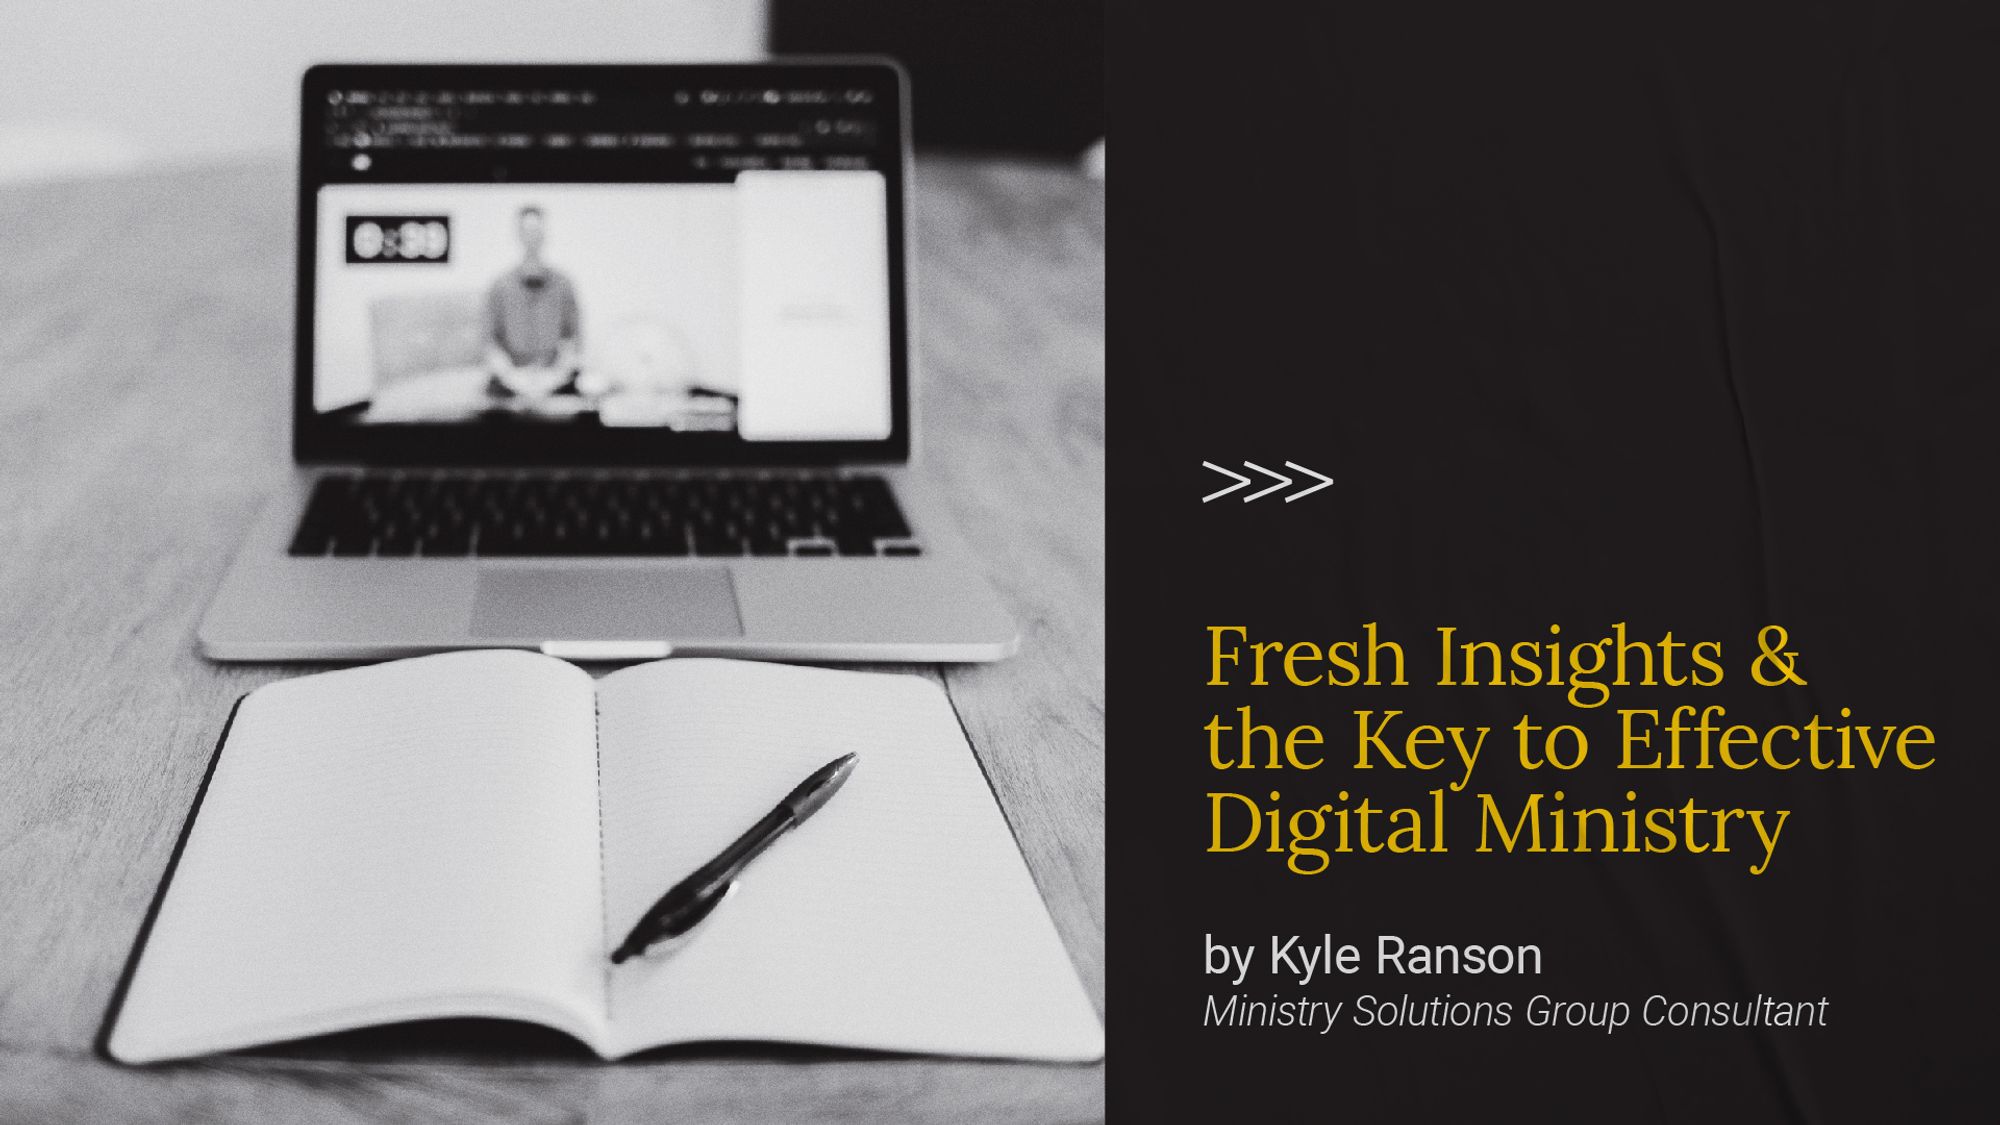 The Key to Effective Digital Ministry